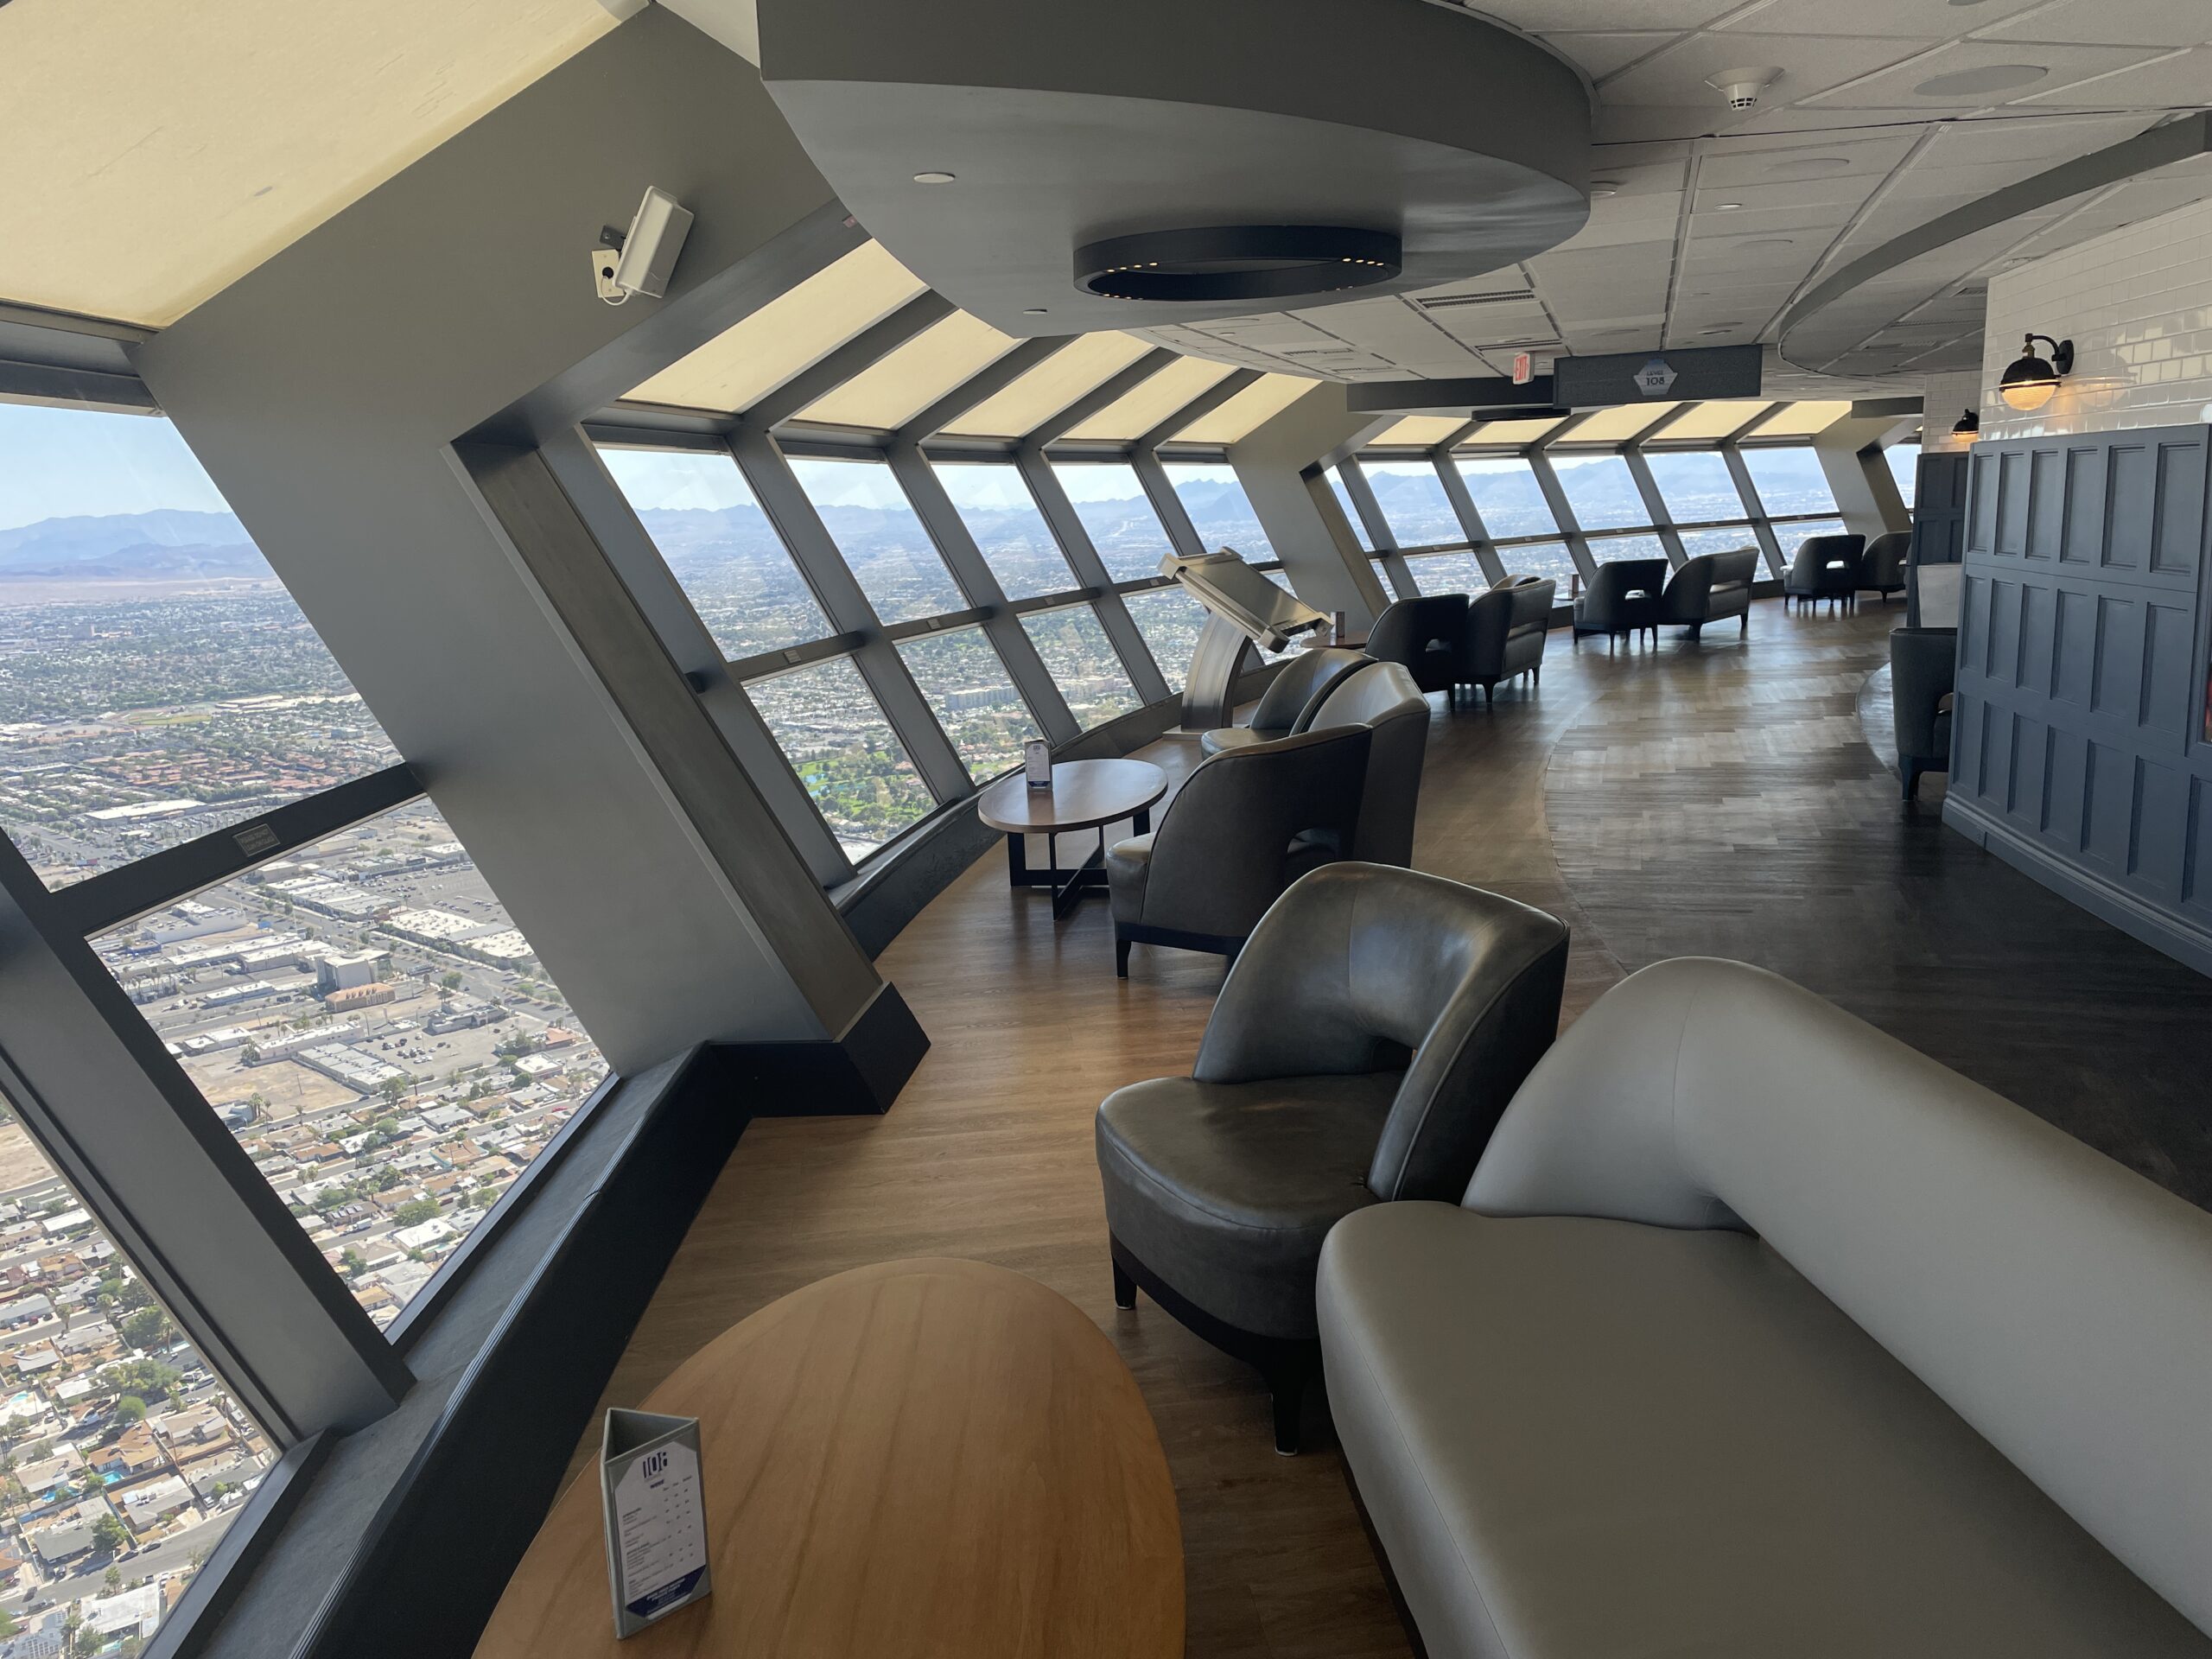 Angled windows with a view of Las Vegas below in STRATs indoor observation deck